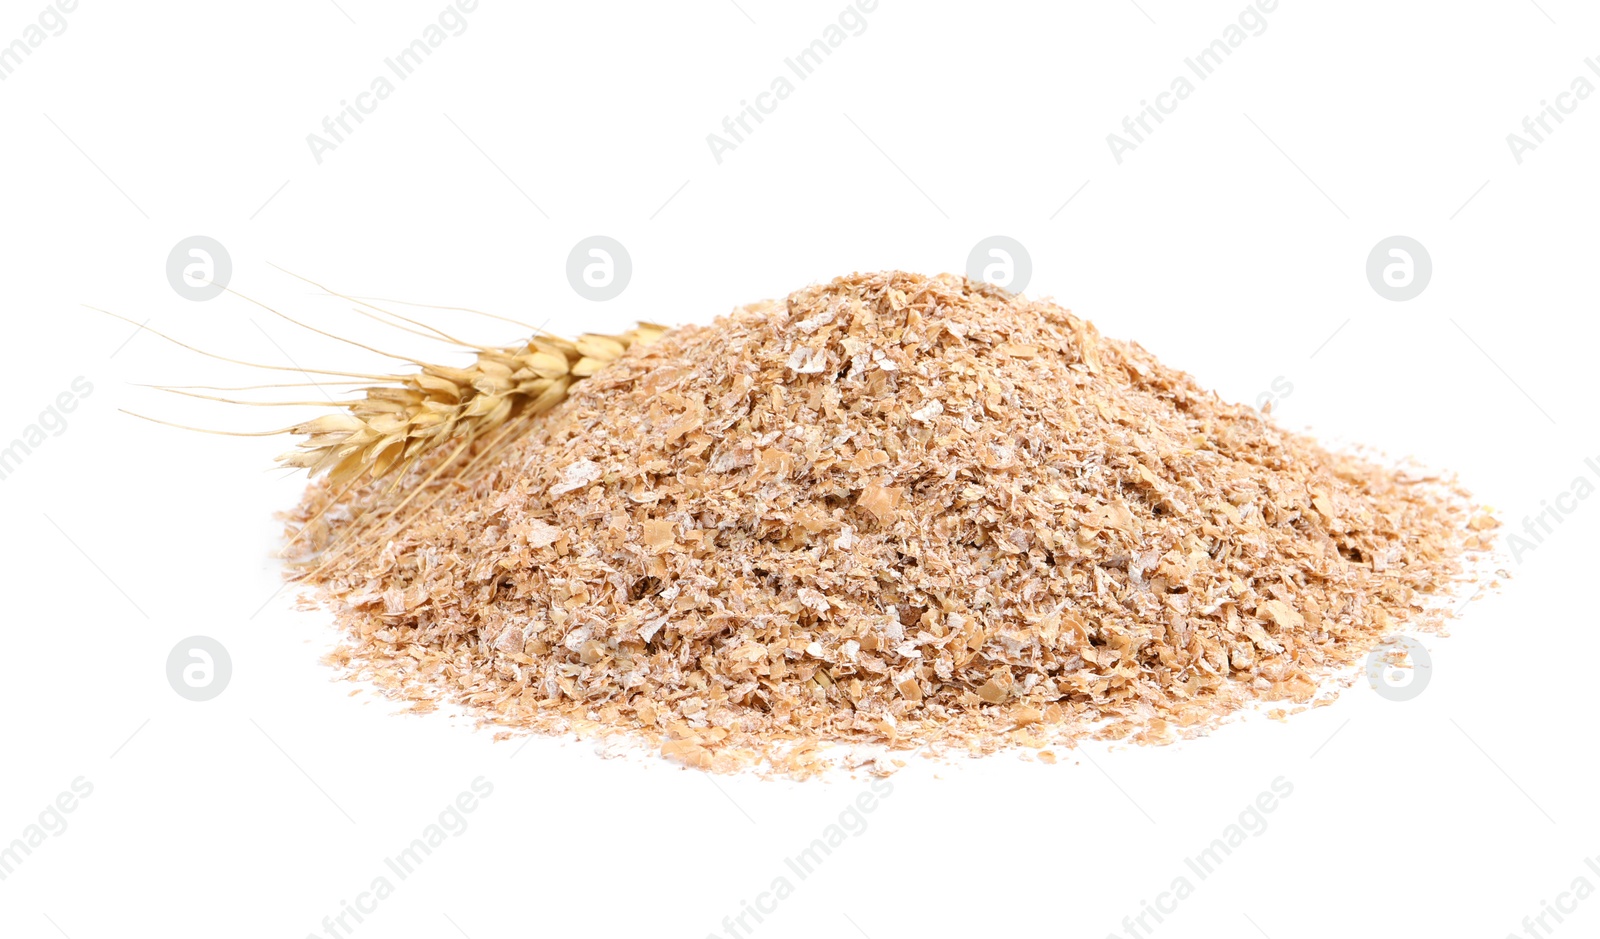 Photo of Pile of wheat bran on white background